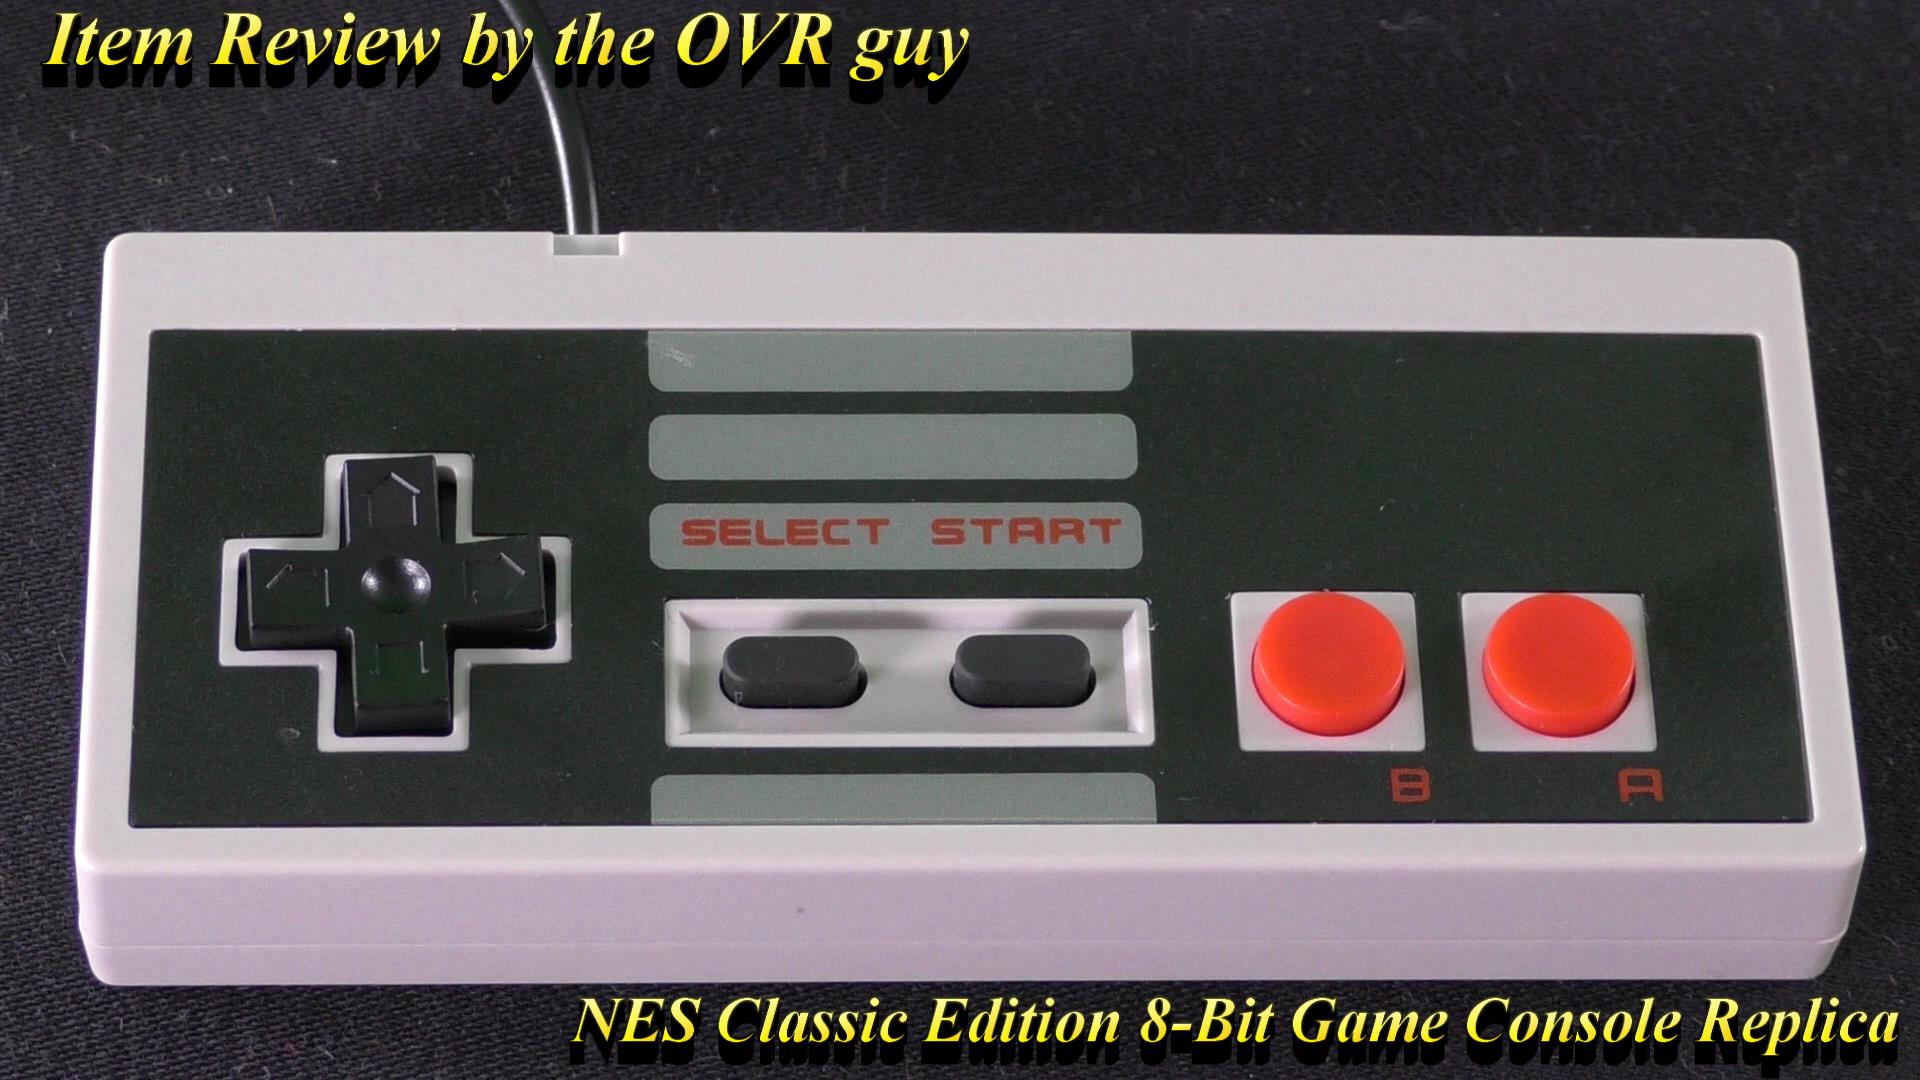 is the nes classic with 500 games licensed by nintendo